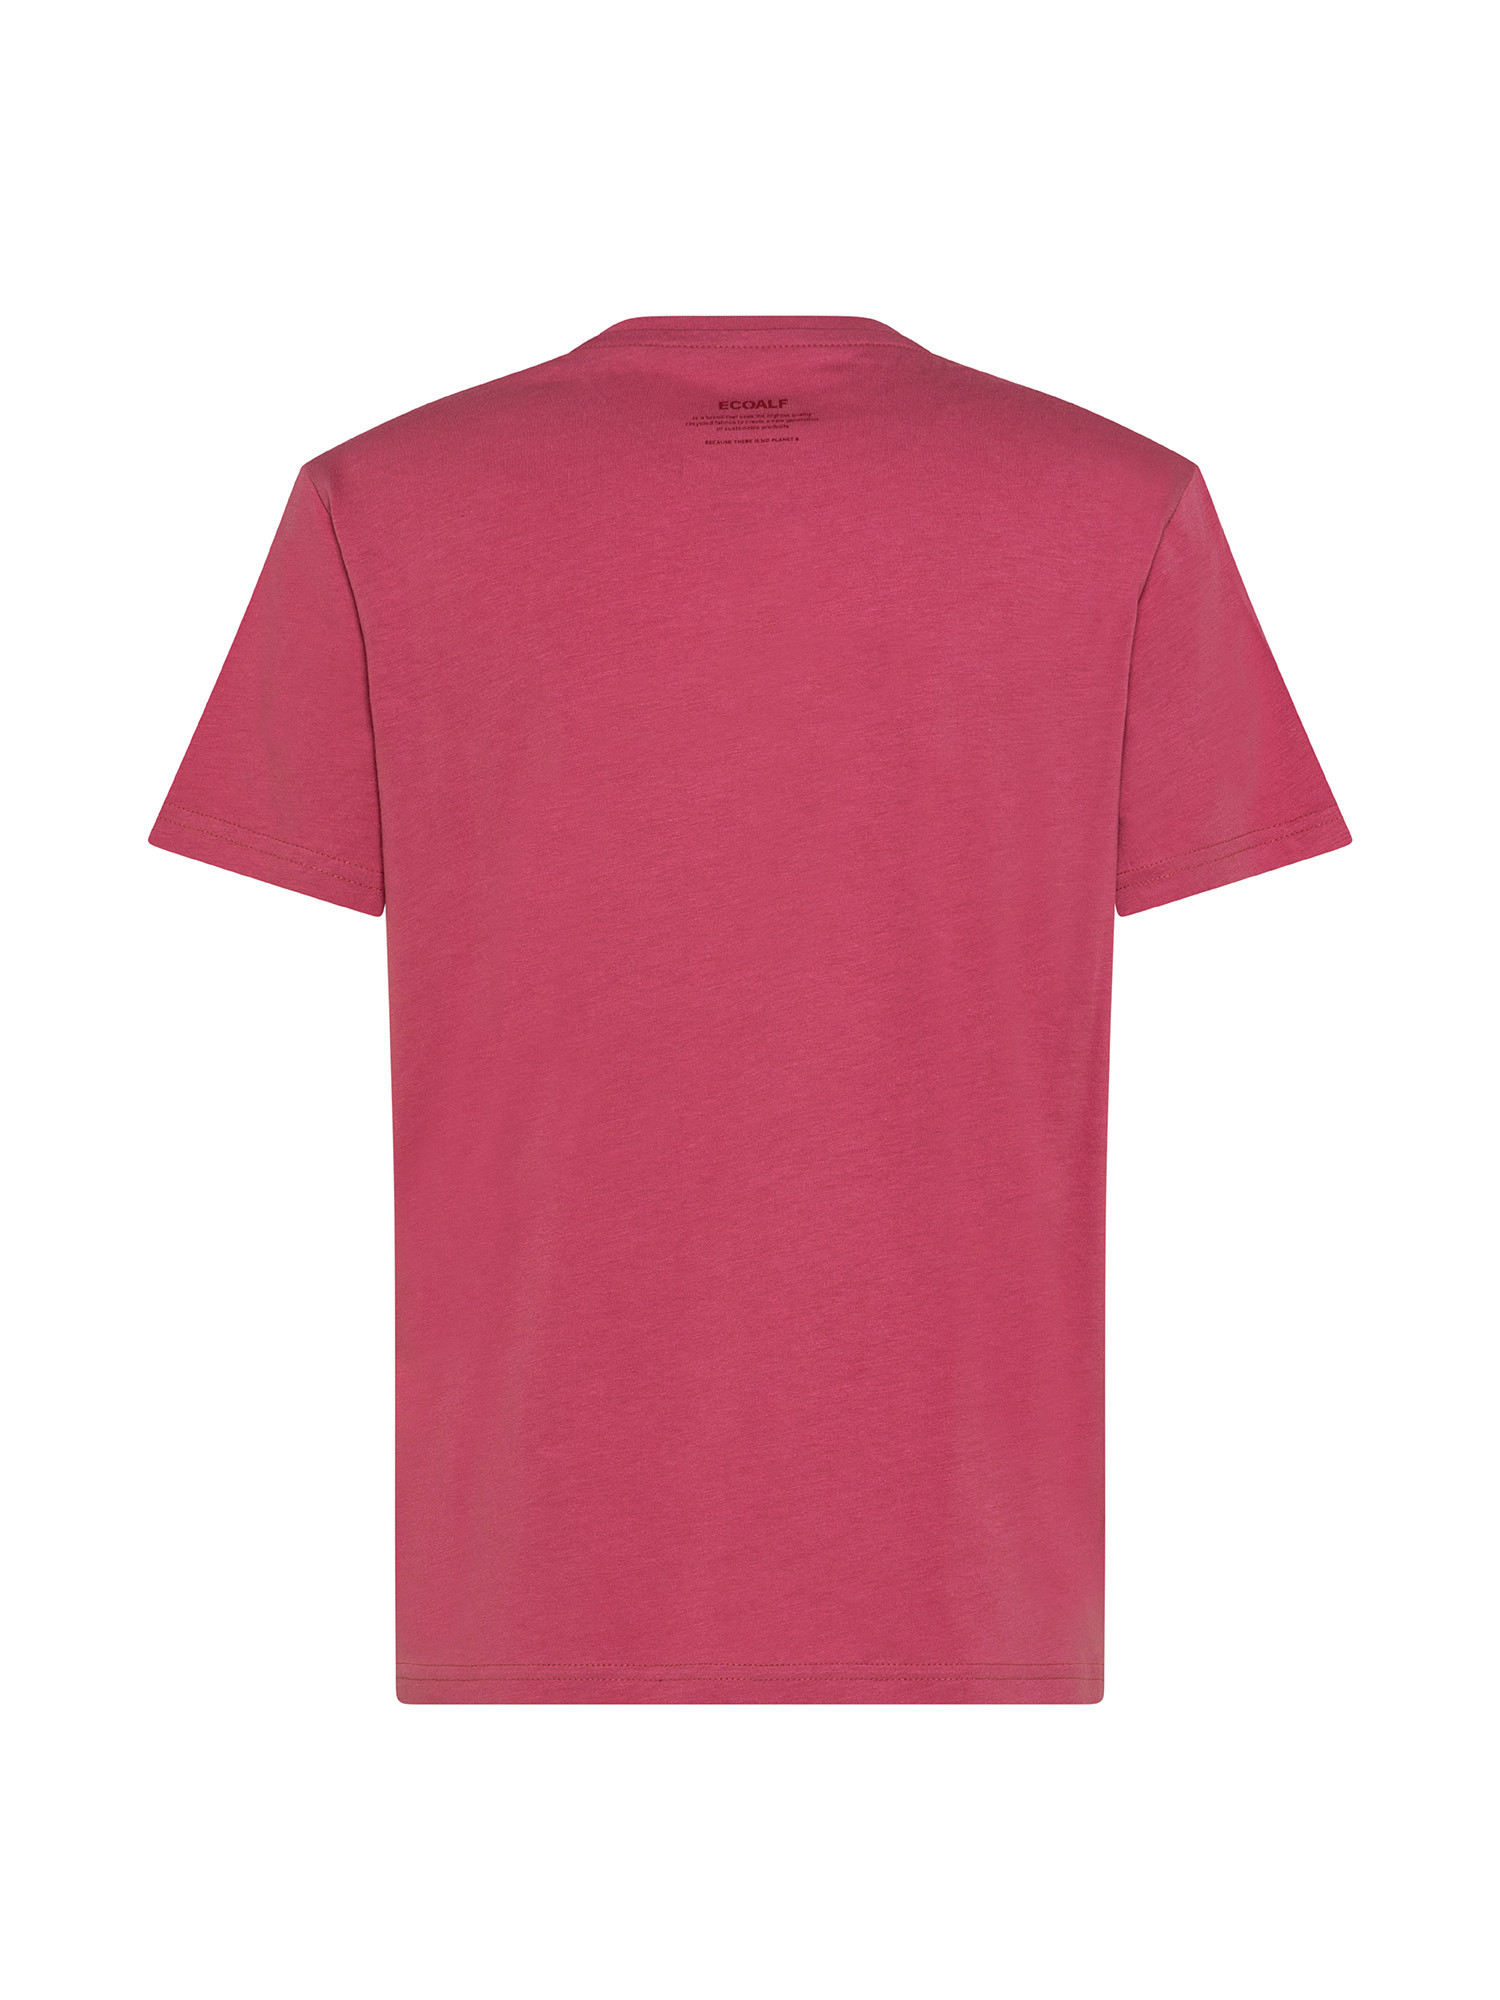 Ecoalf - T-shirt Ventie con stampa, Rosa fenicottero, large image number 1